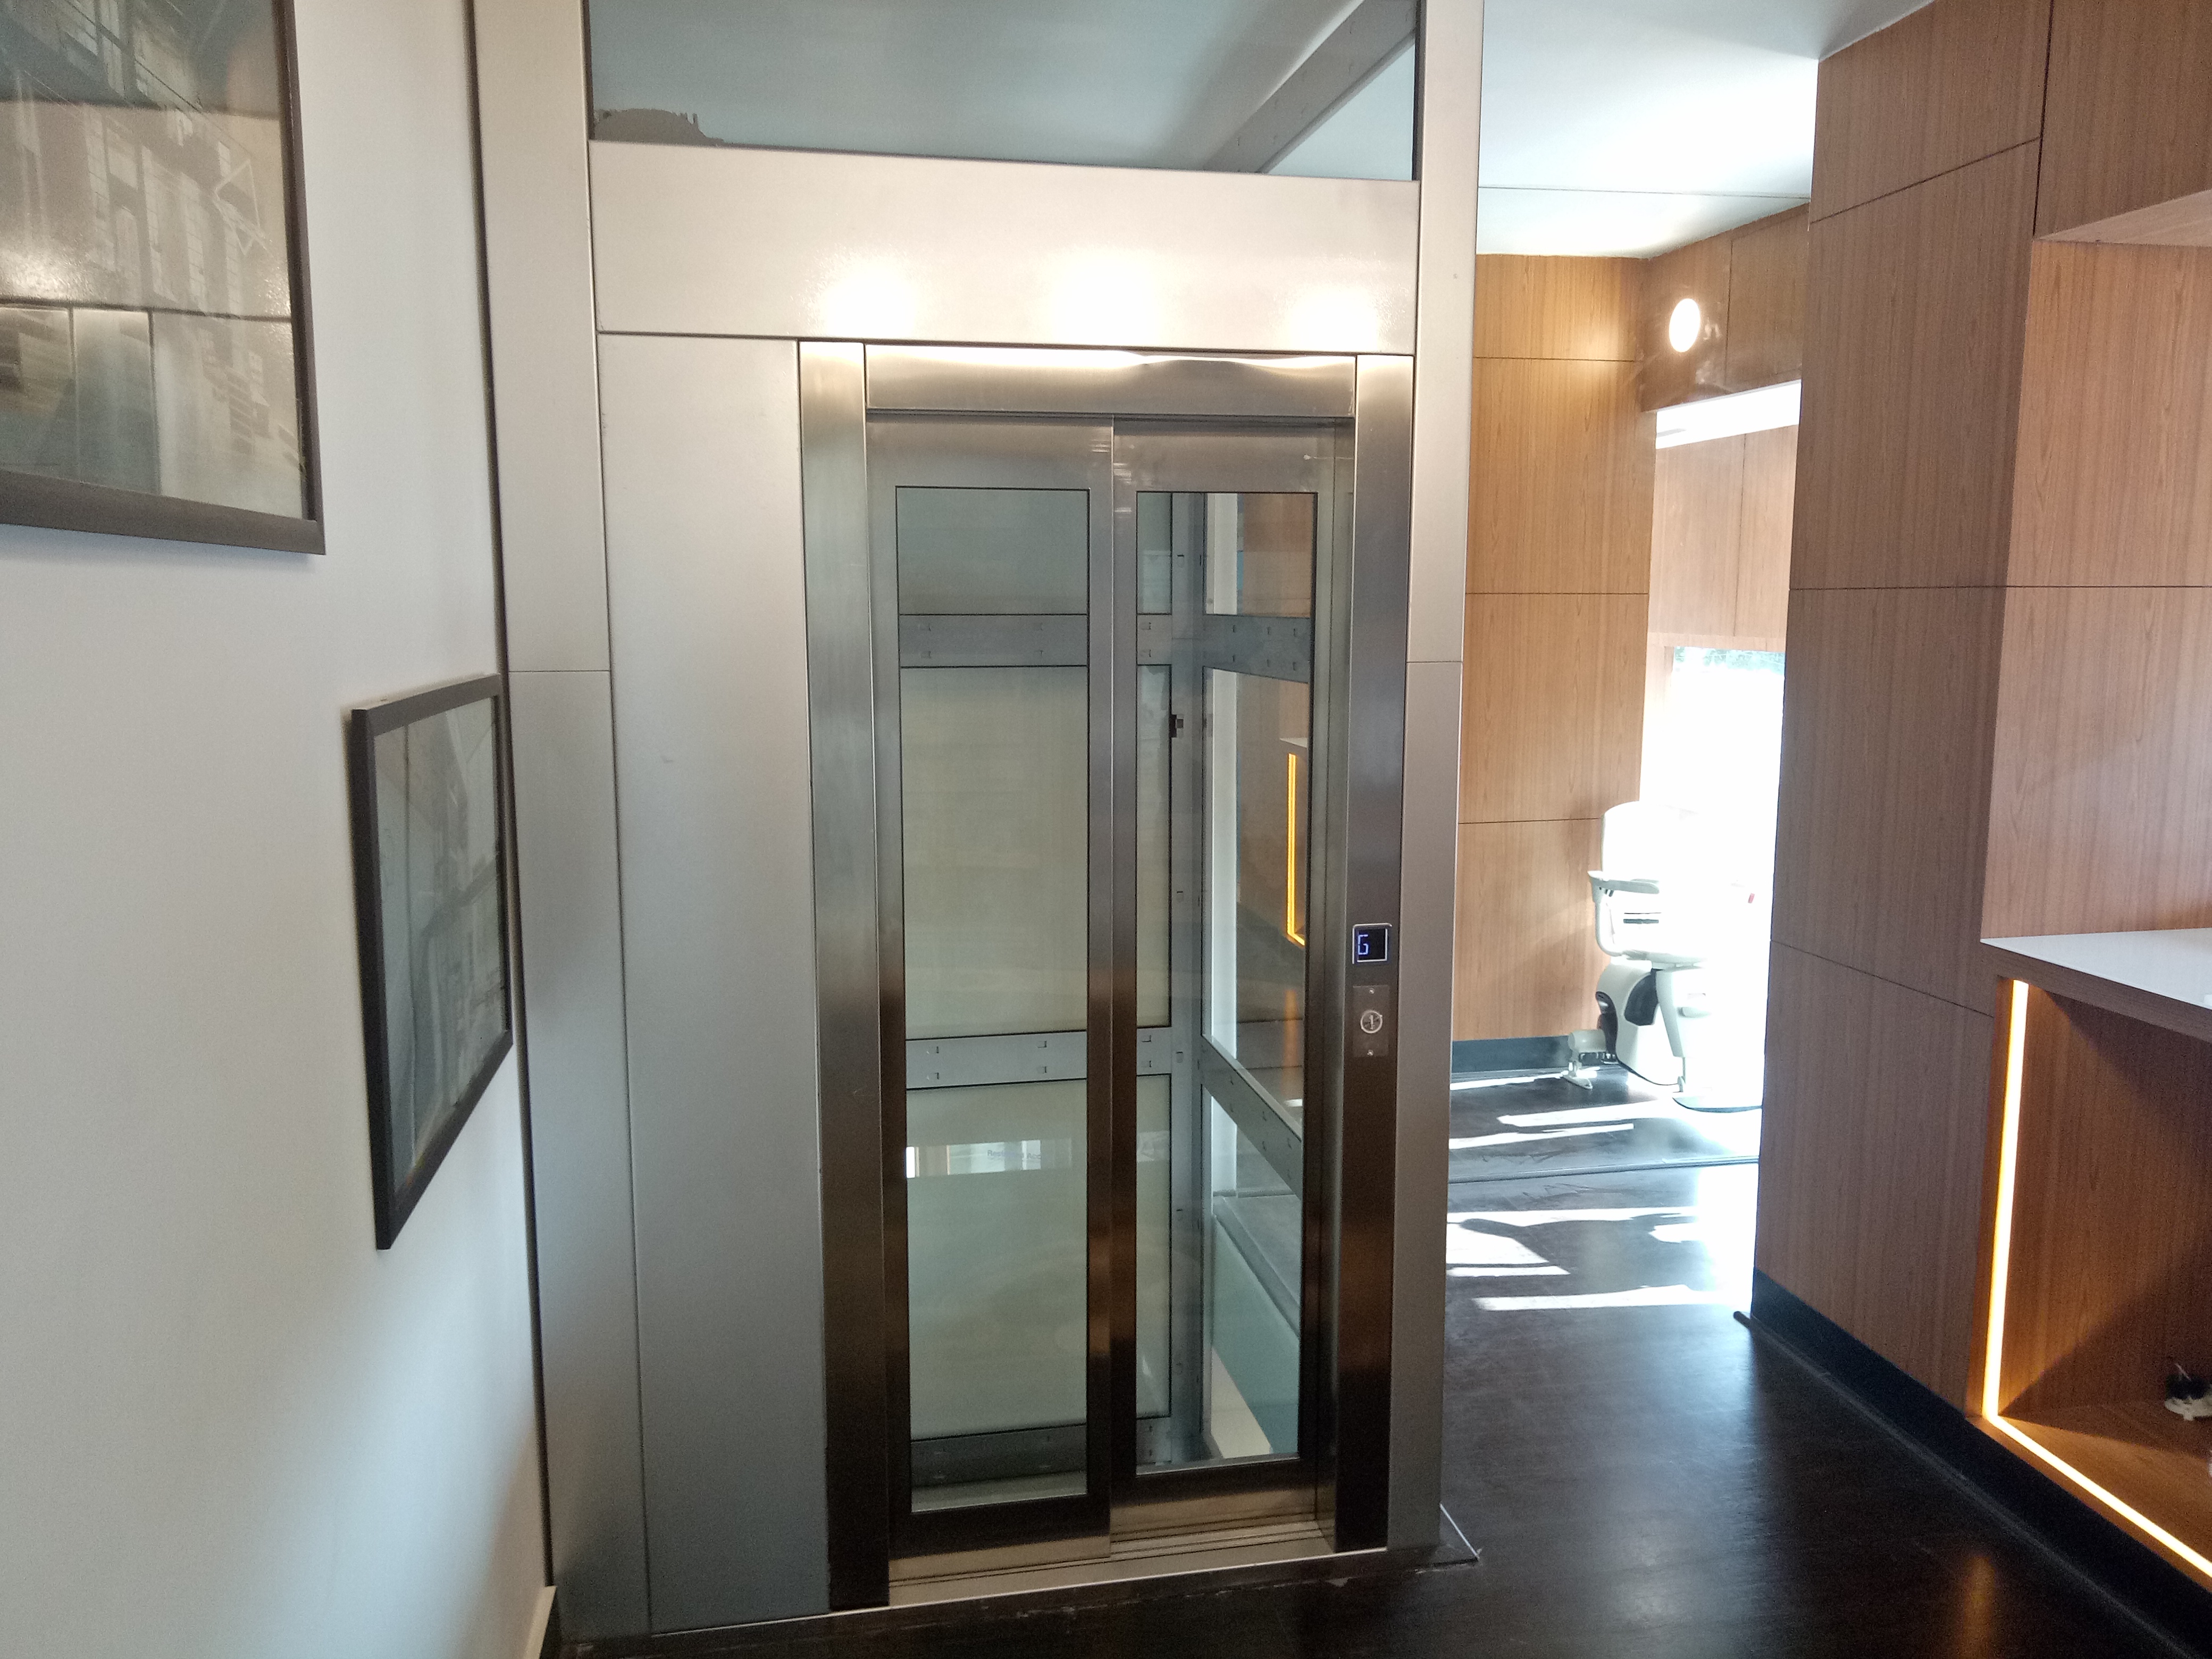 Buy Home Lifts in India from a Reputed Supplier - Elevators India